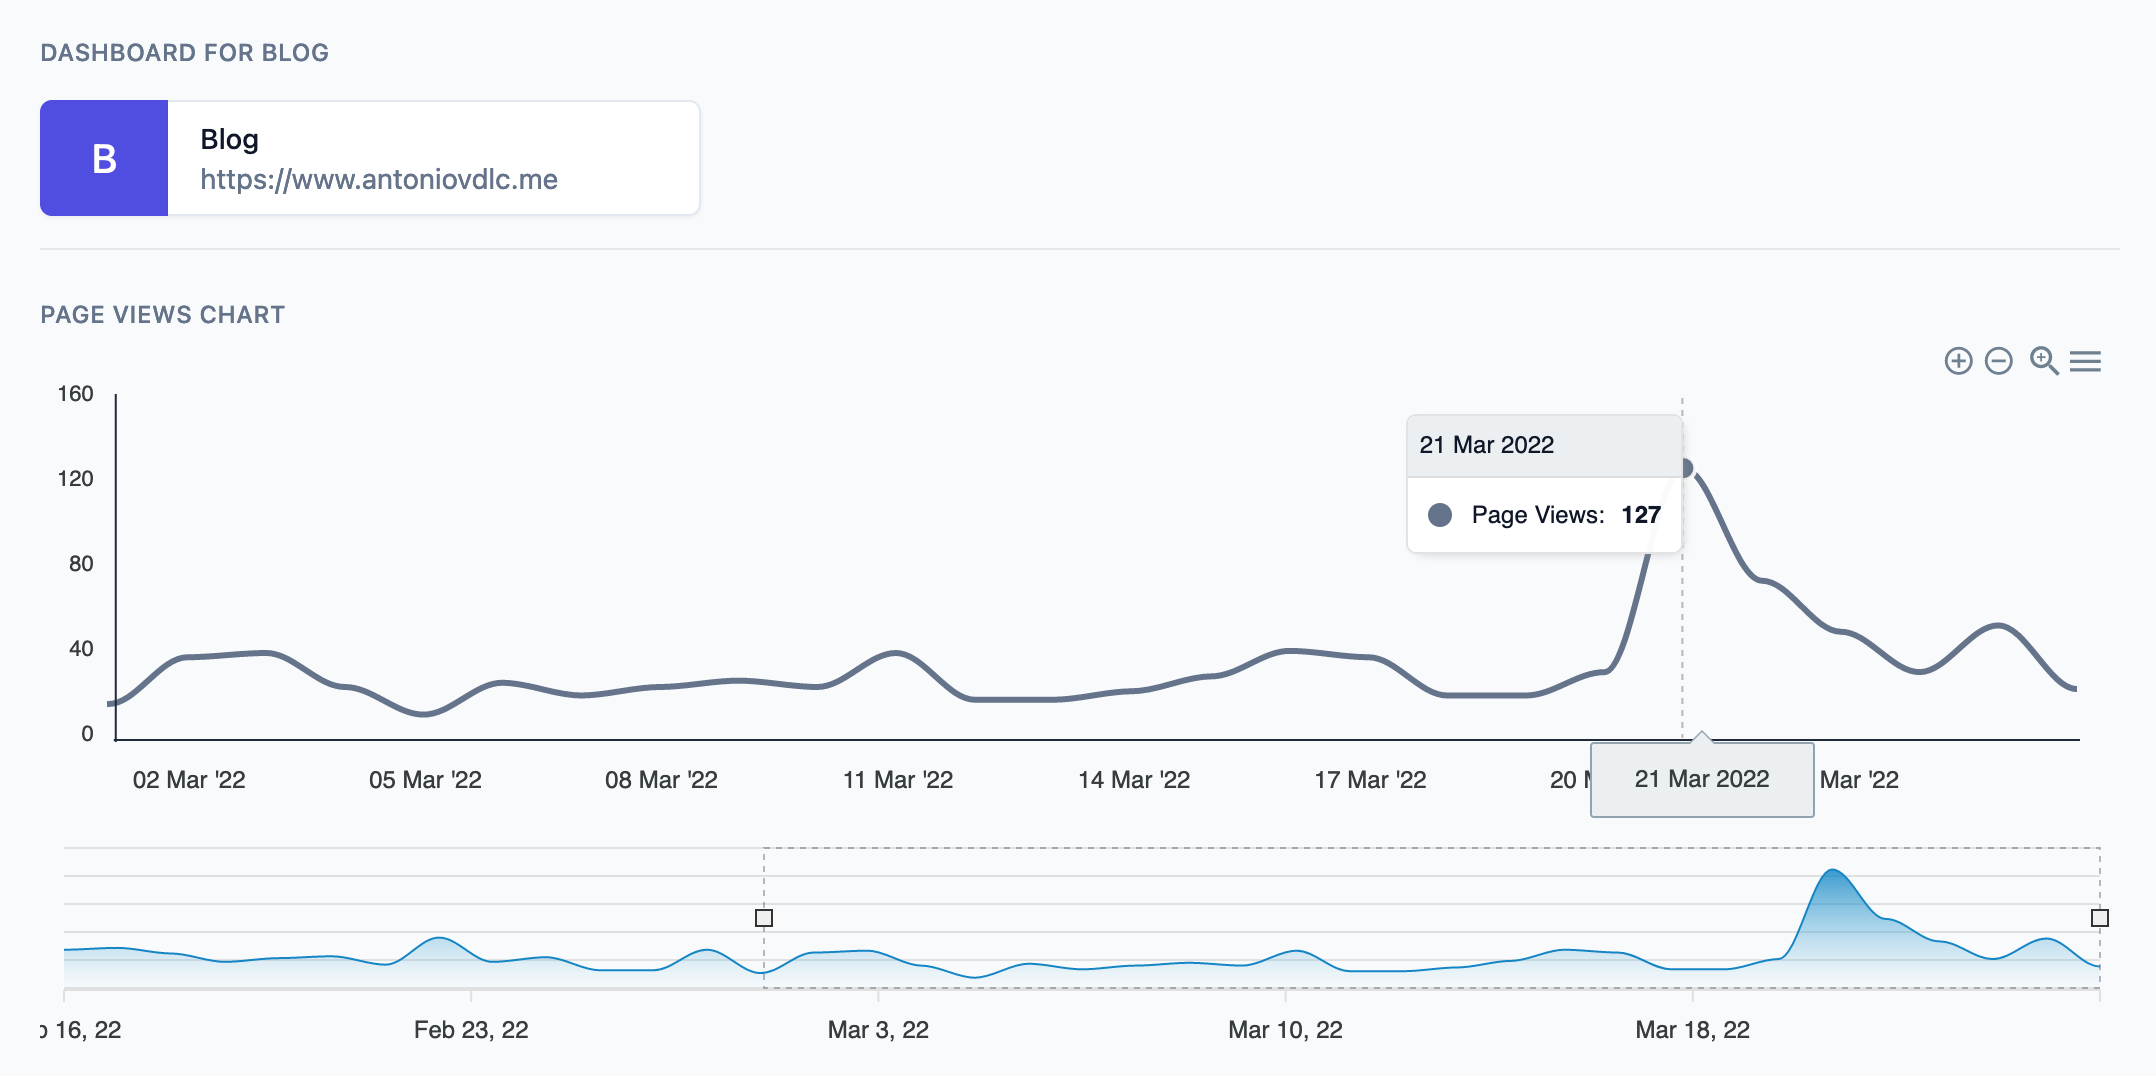 Dashboard displaying the total page views per day in March 2022 on this blog